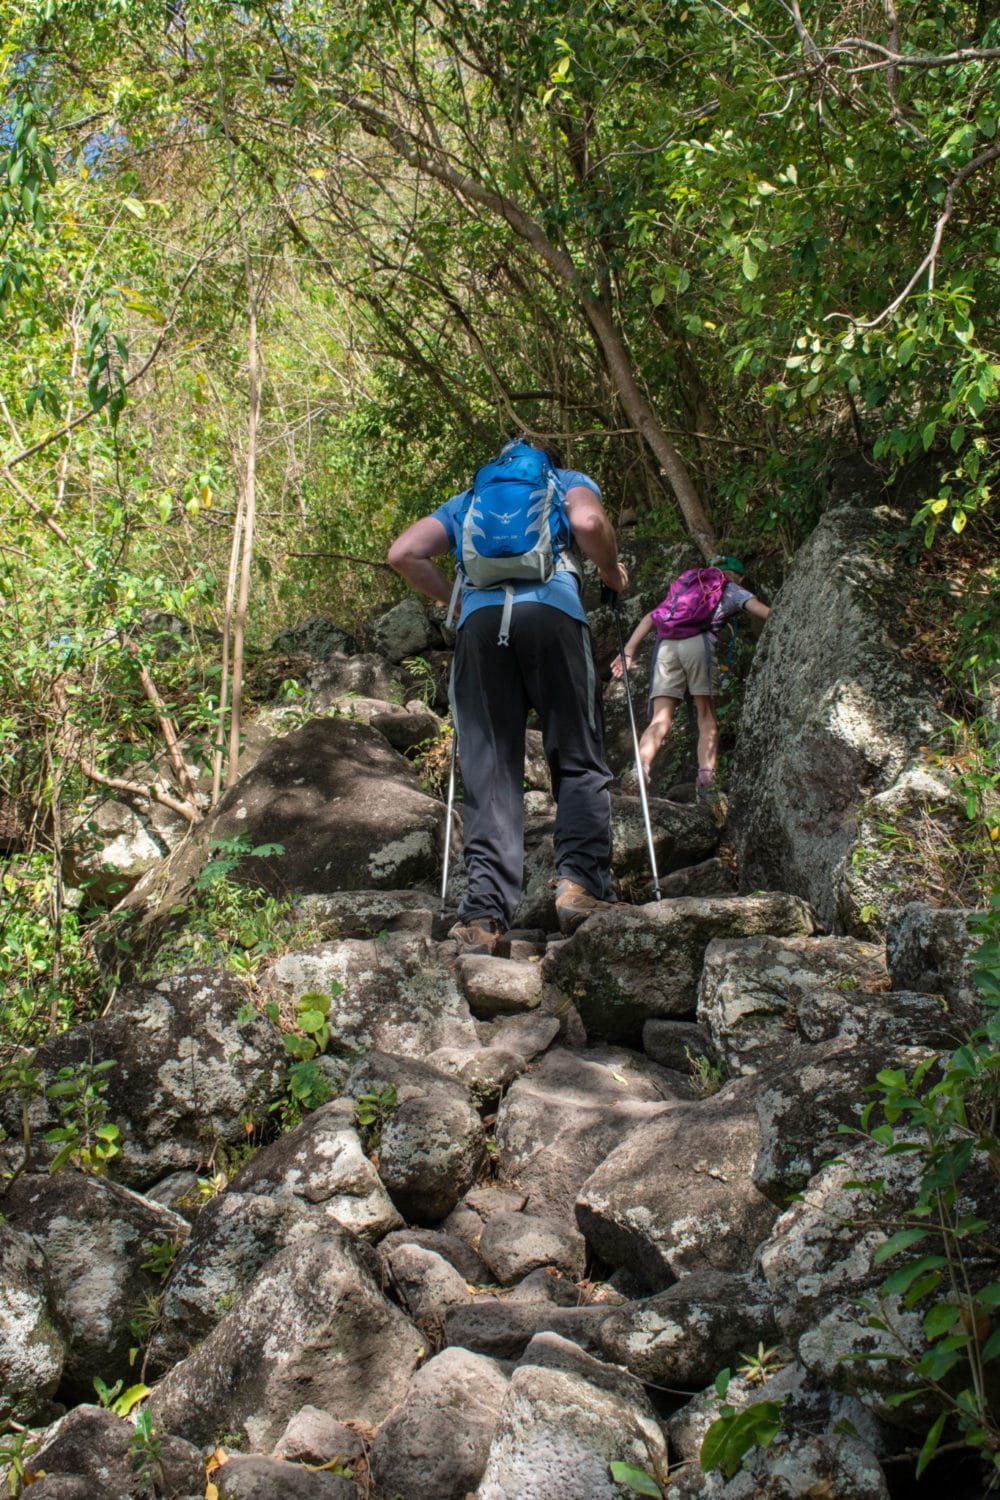 On the Gros Piton trail